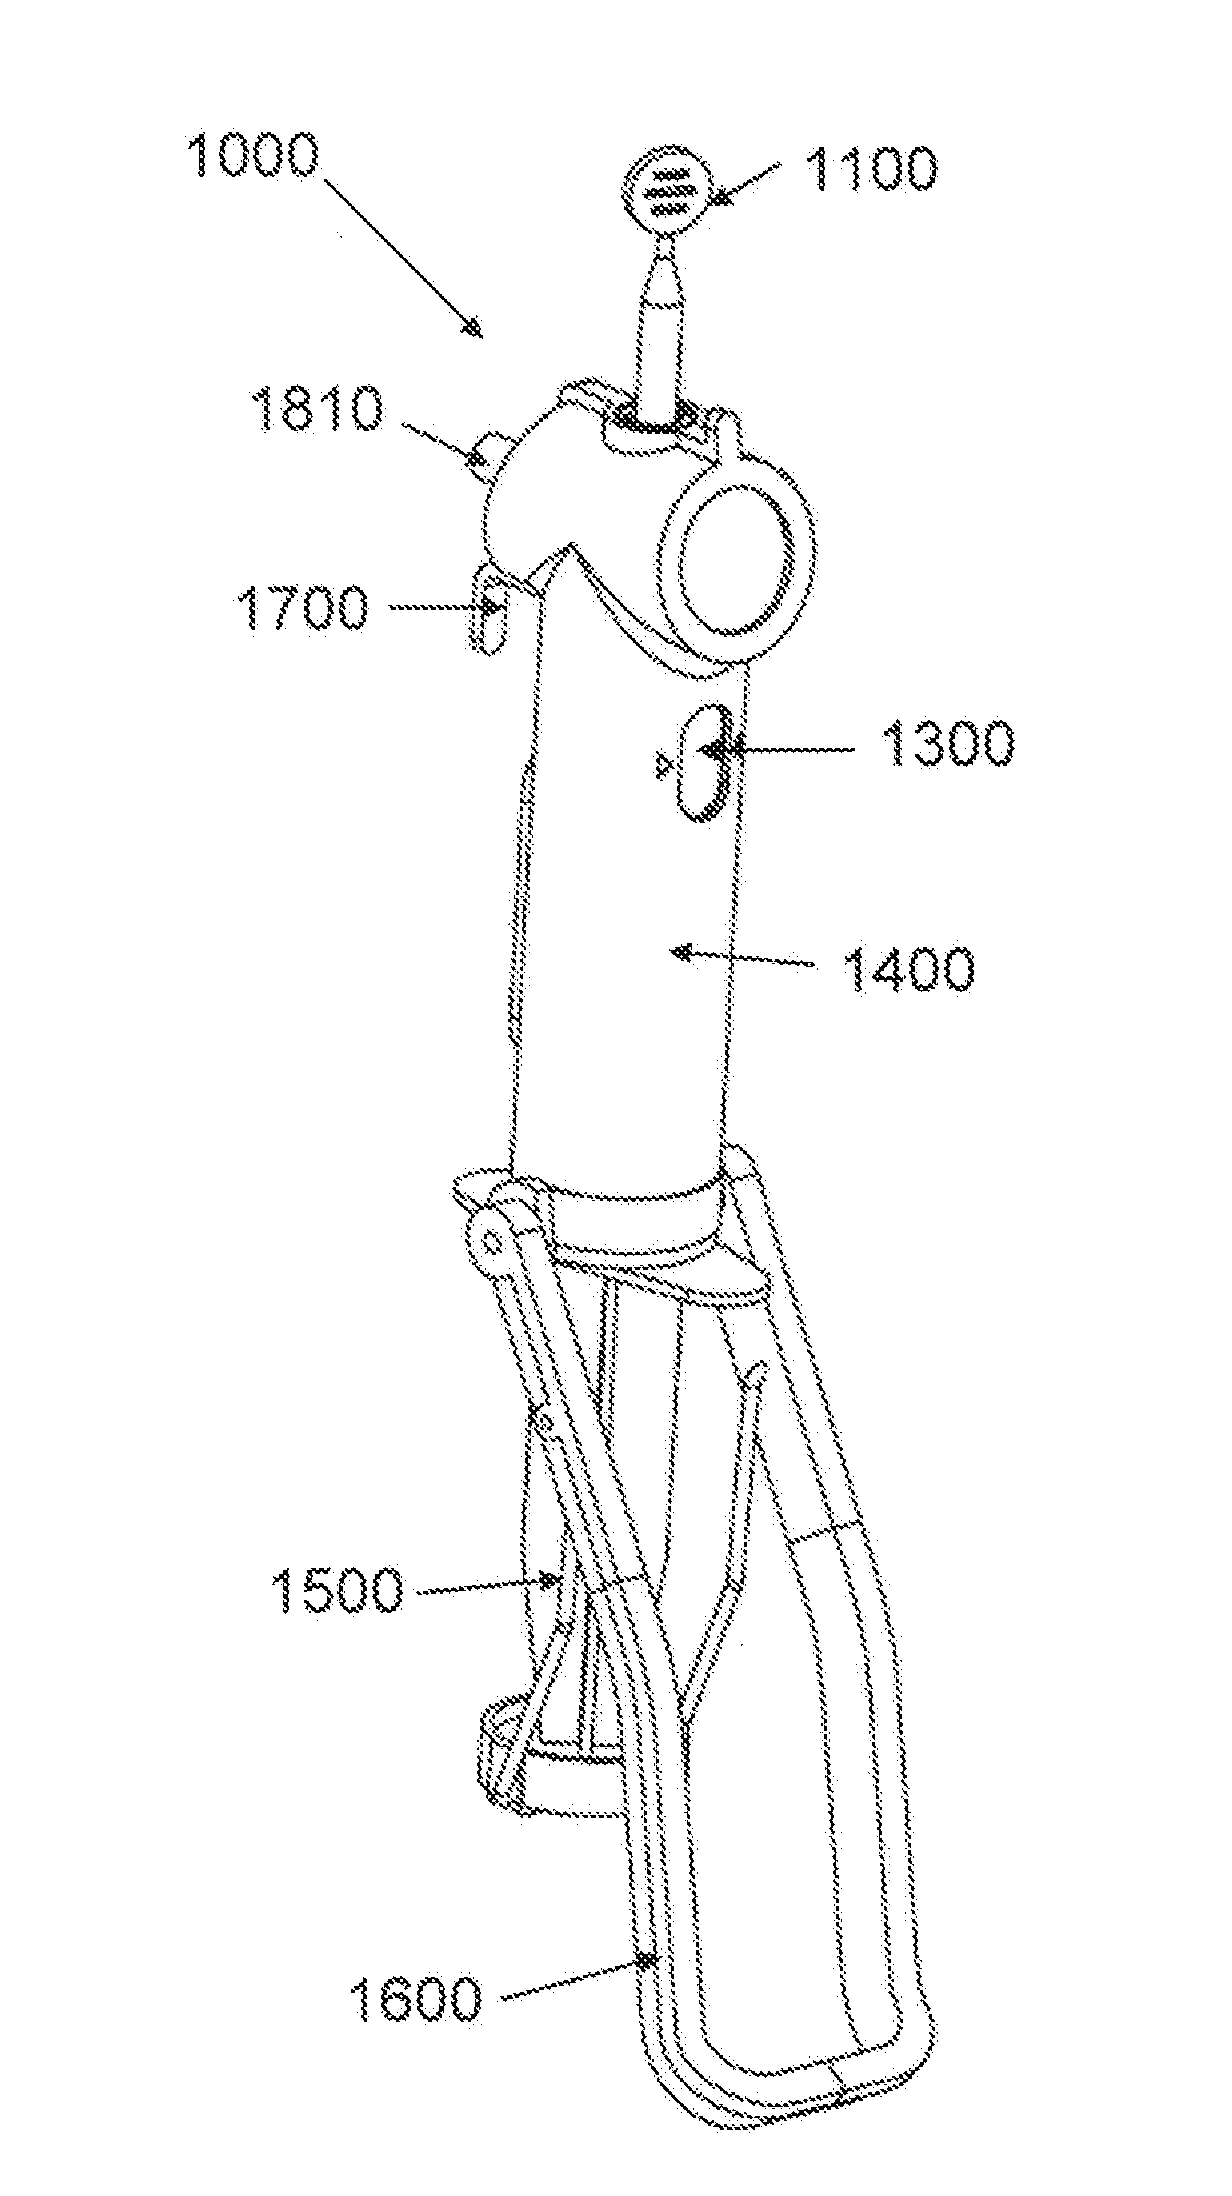 Device to deliver a predetermined amount of a substance to a natural orifice of the body